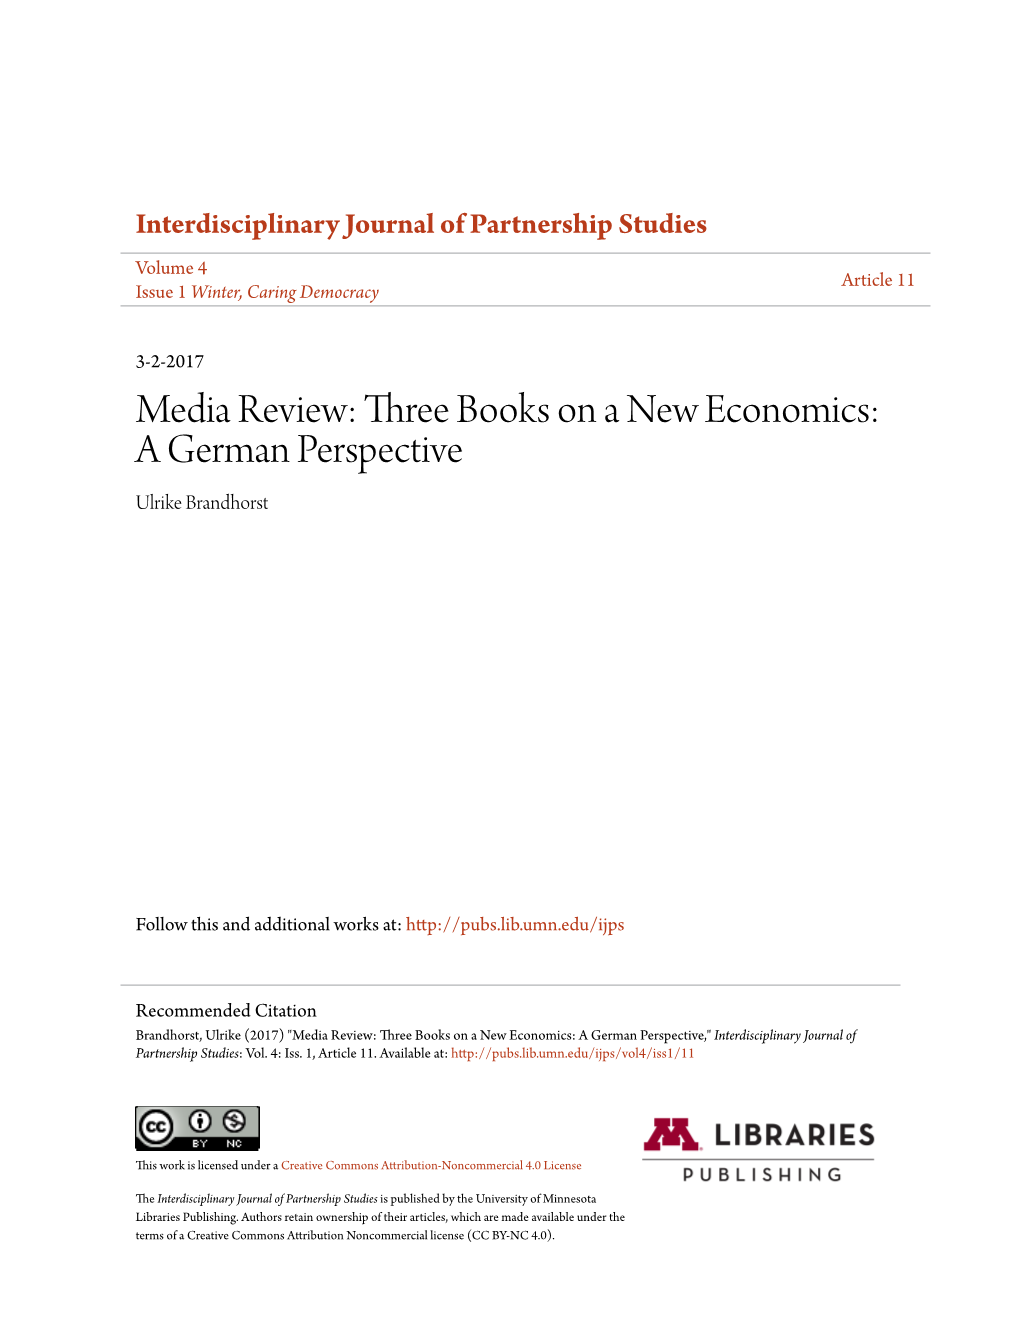 Media Review: Three Books on a New Economics: a German Perspective Ulrike Brandhorst